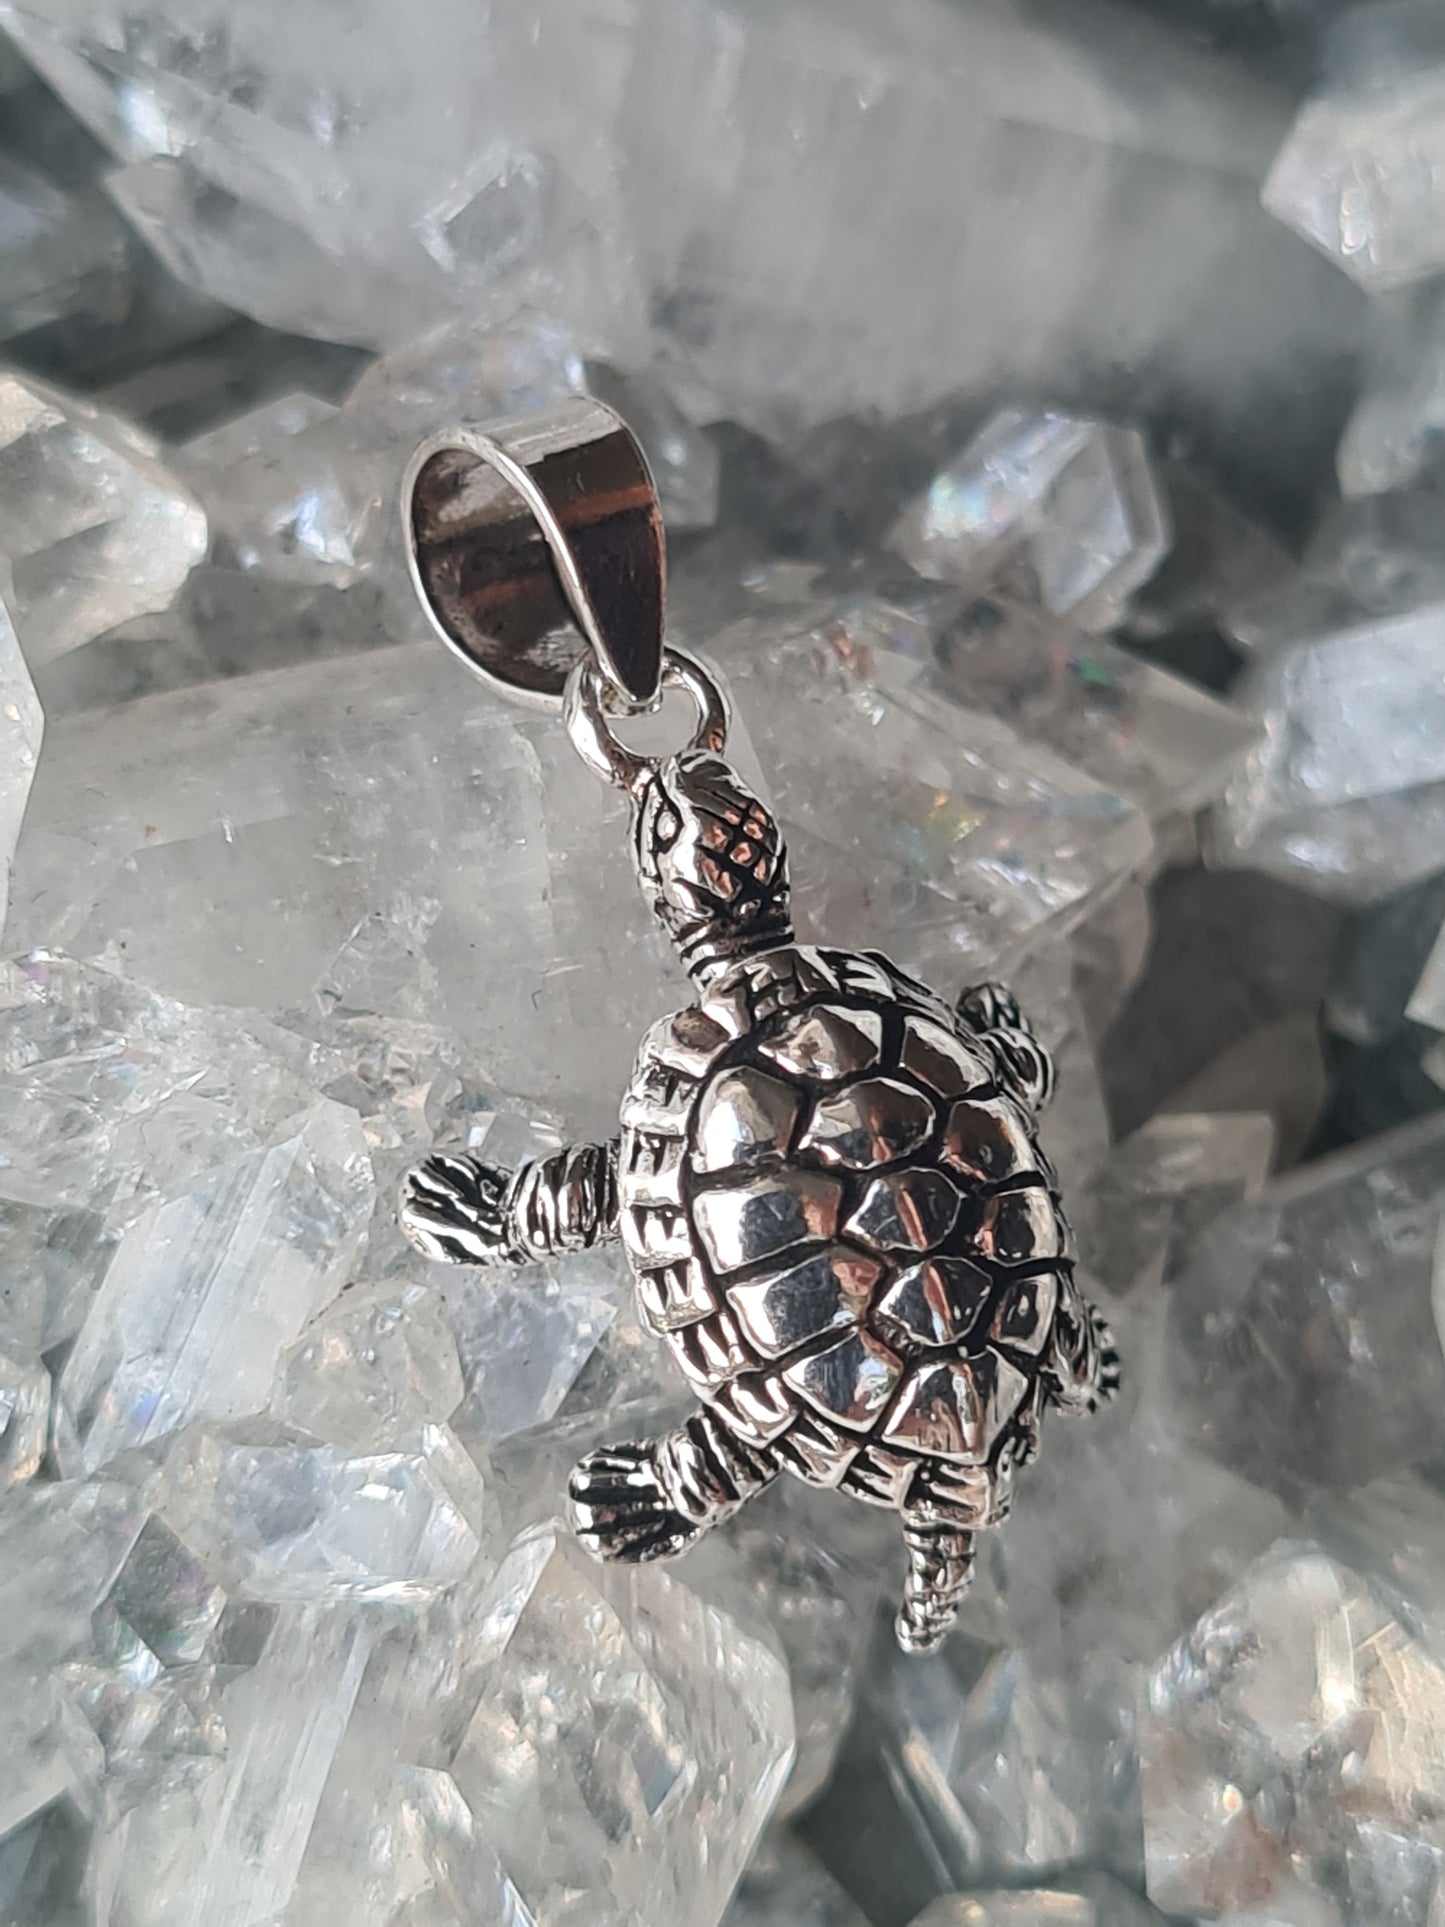 A sterling silver turtle pendant with articulating legs.
Photographed on a raw white crystal cluster.